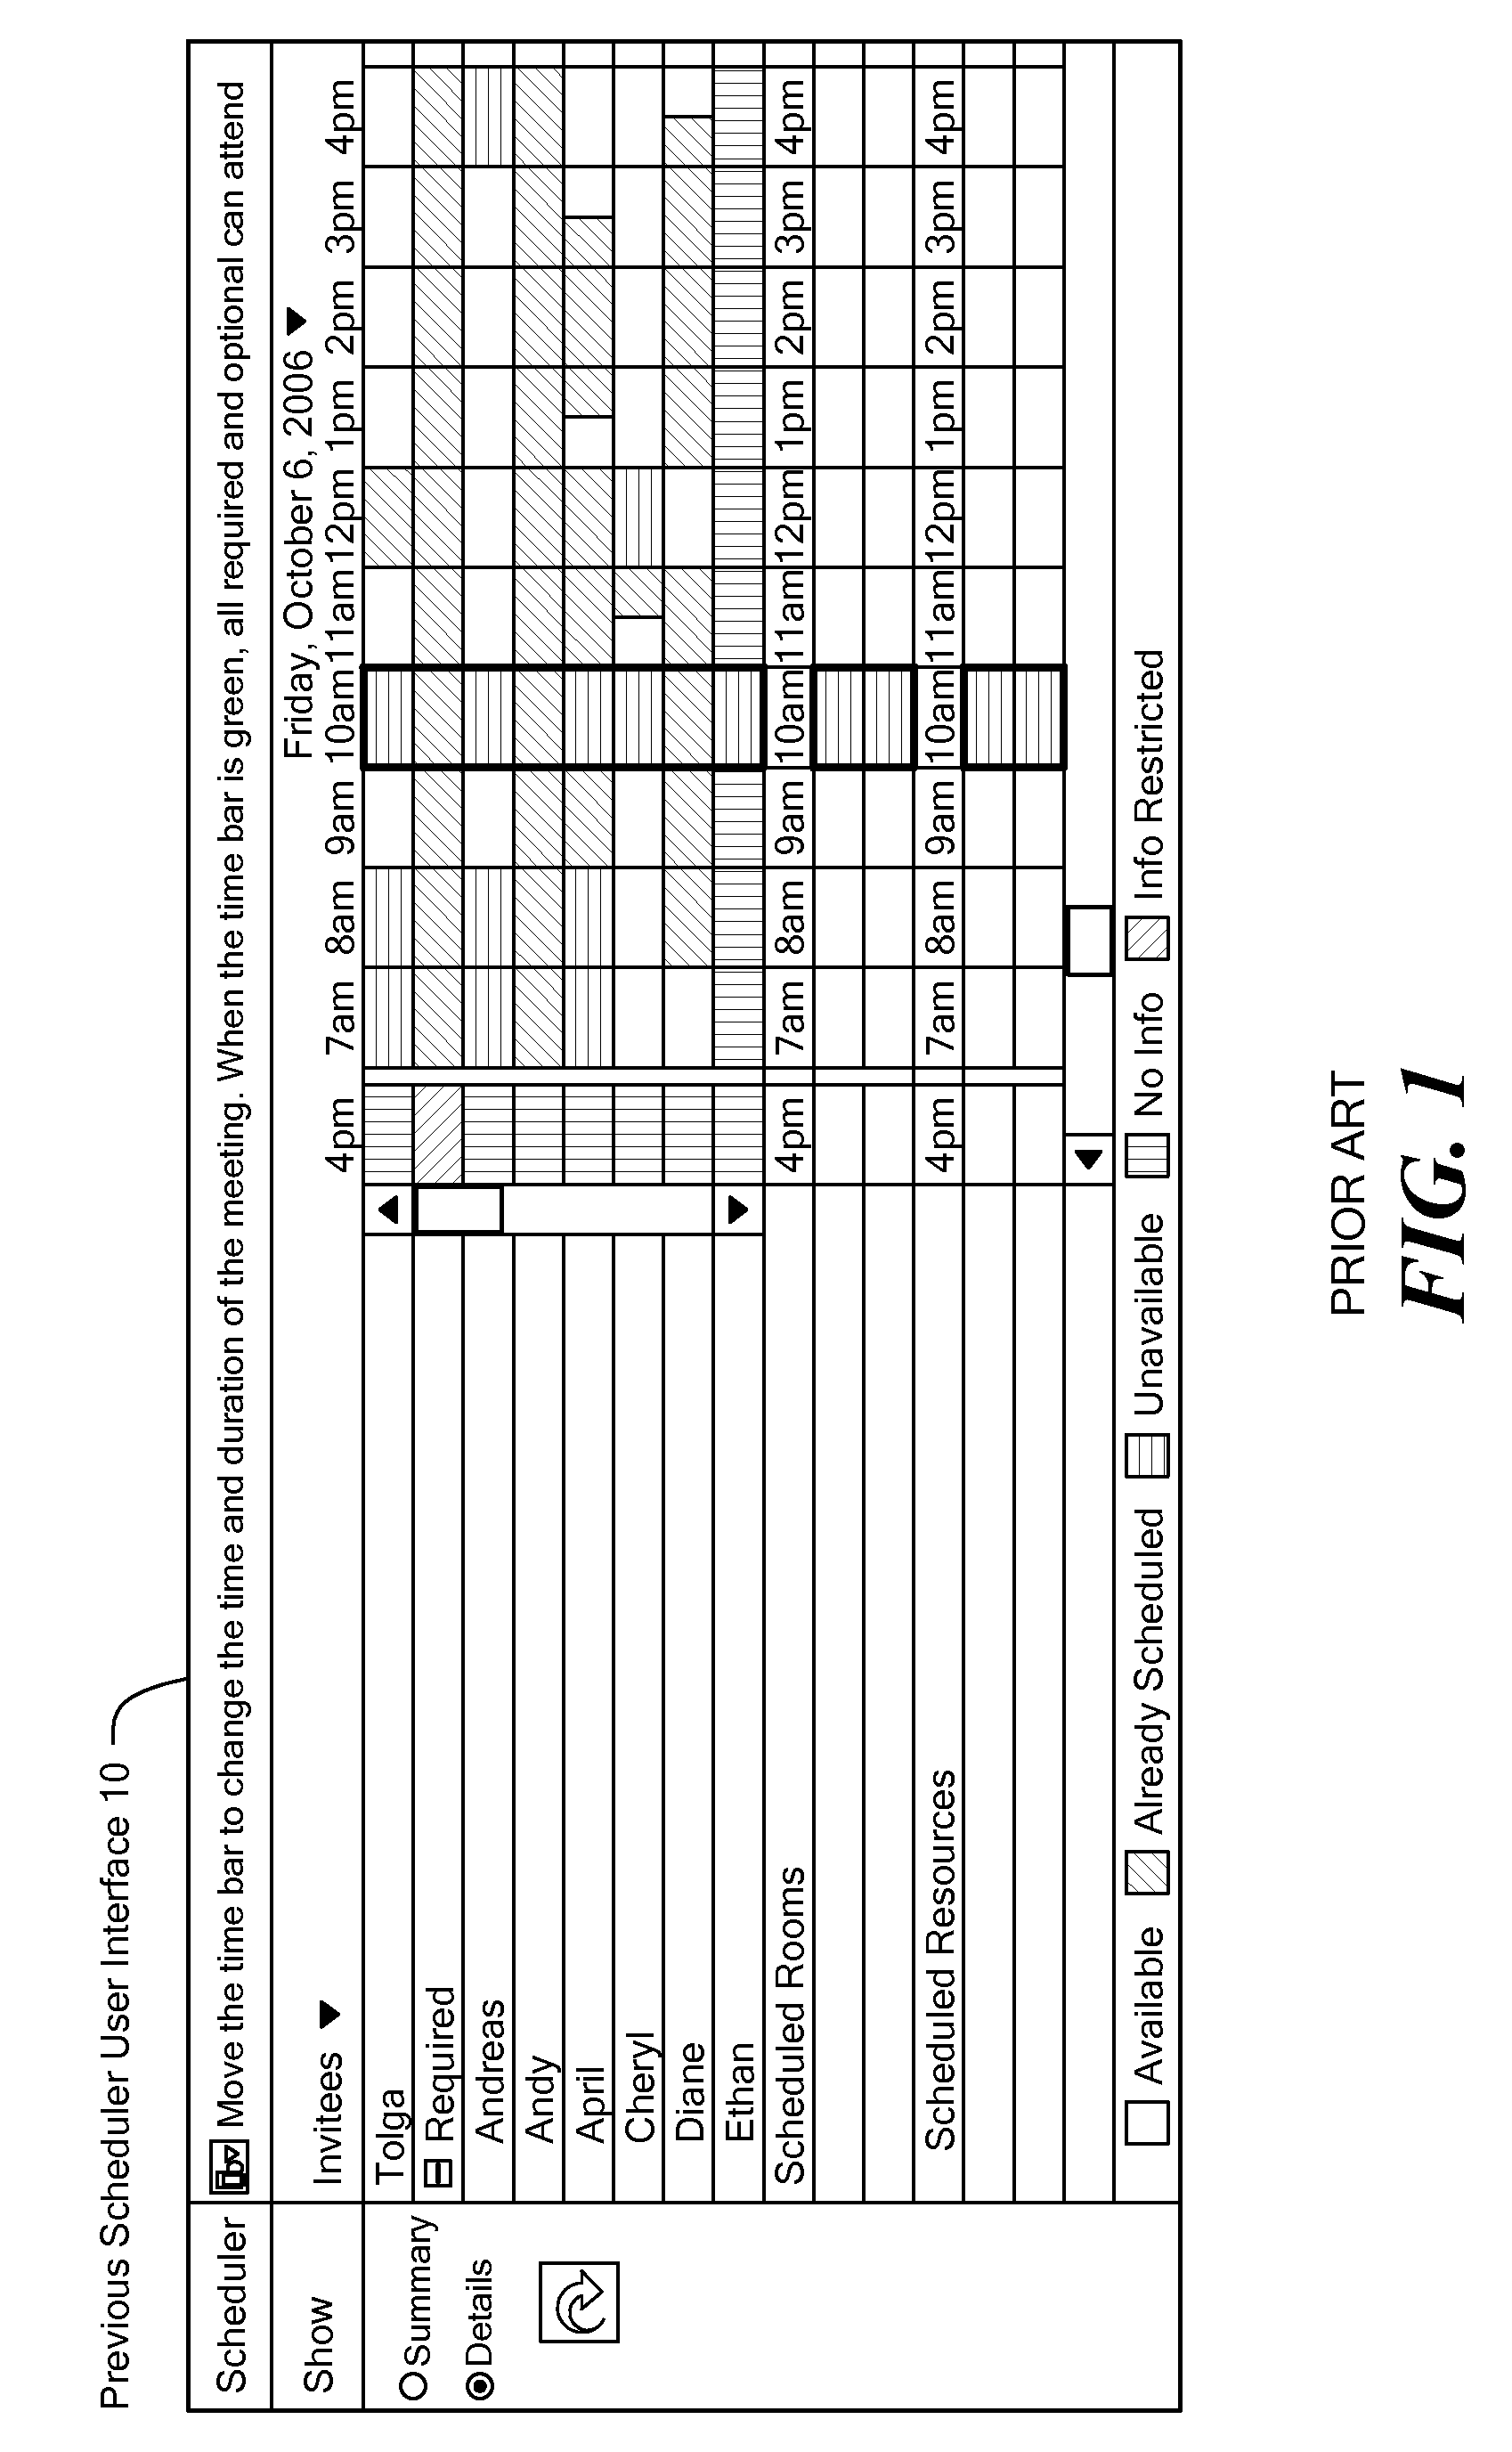 Method and system for clustering electronic calendar schedules to reduce visual complexity and improve efficiency of meeting scheduling